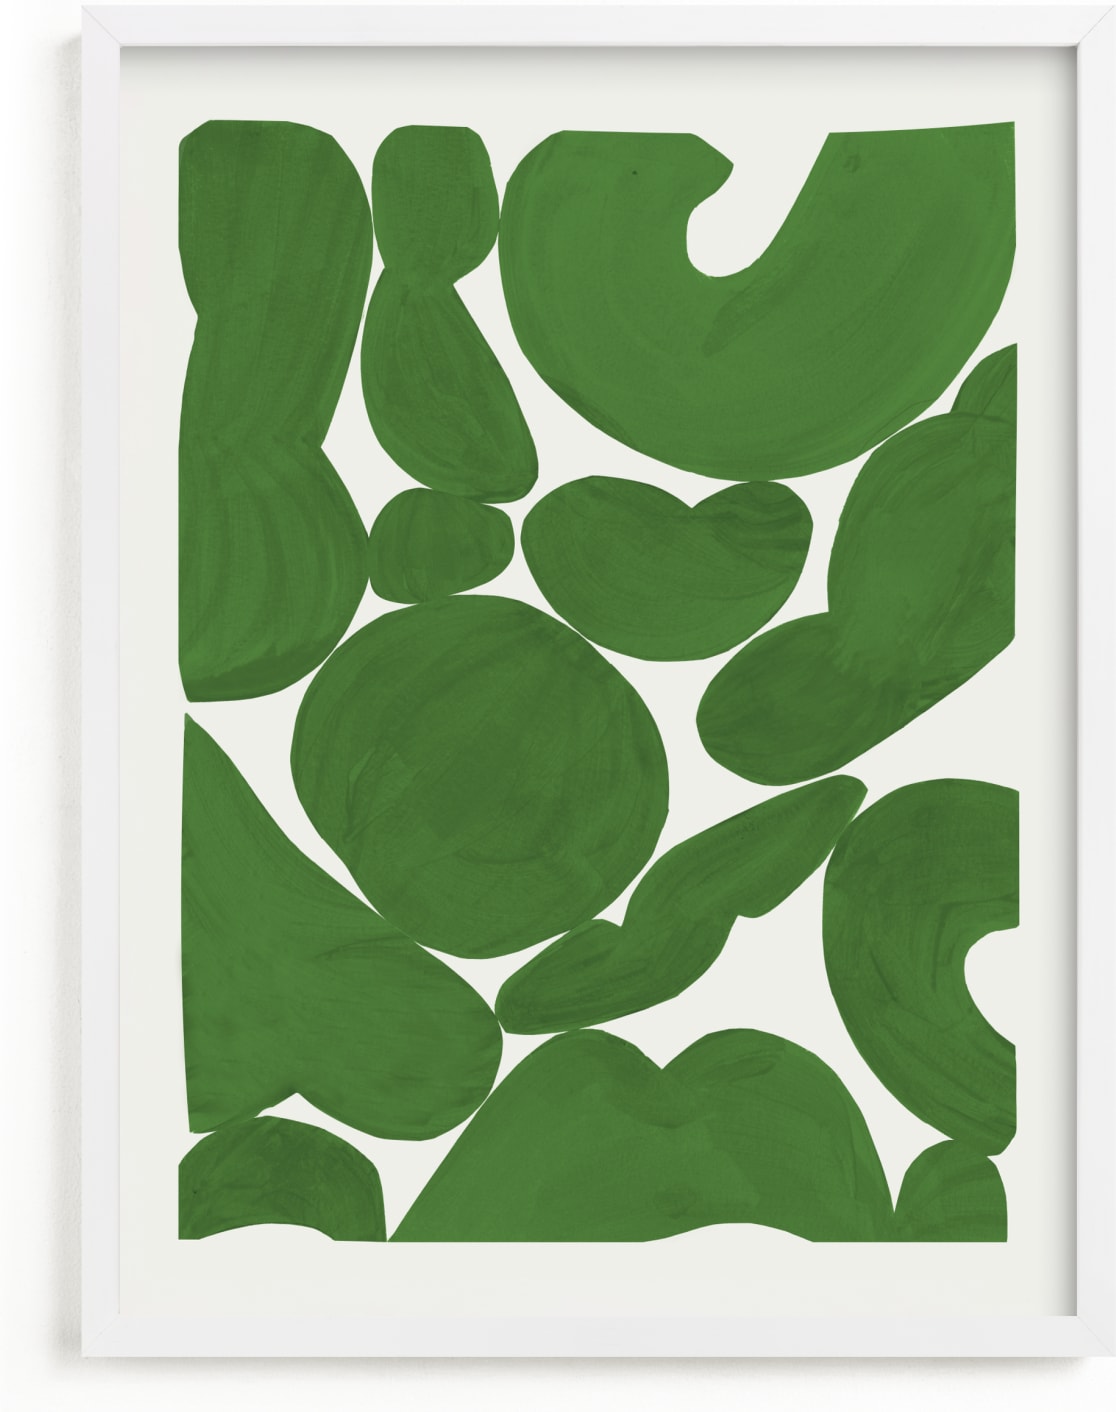 This is a green art by Pati Cascino called Shapes.